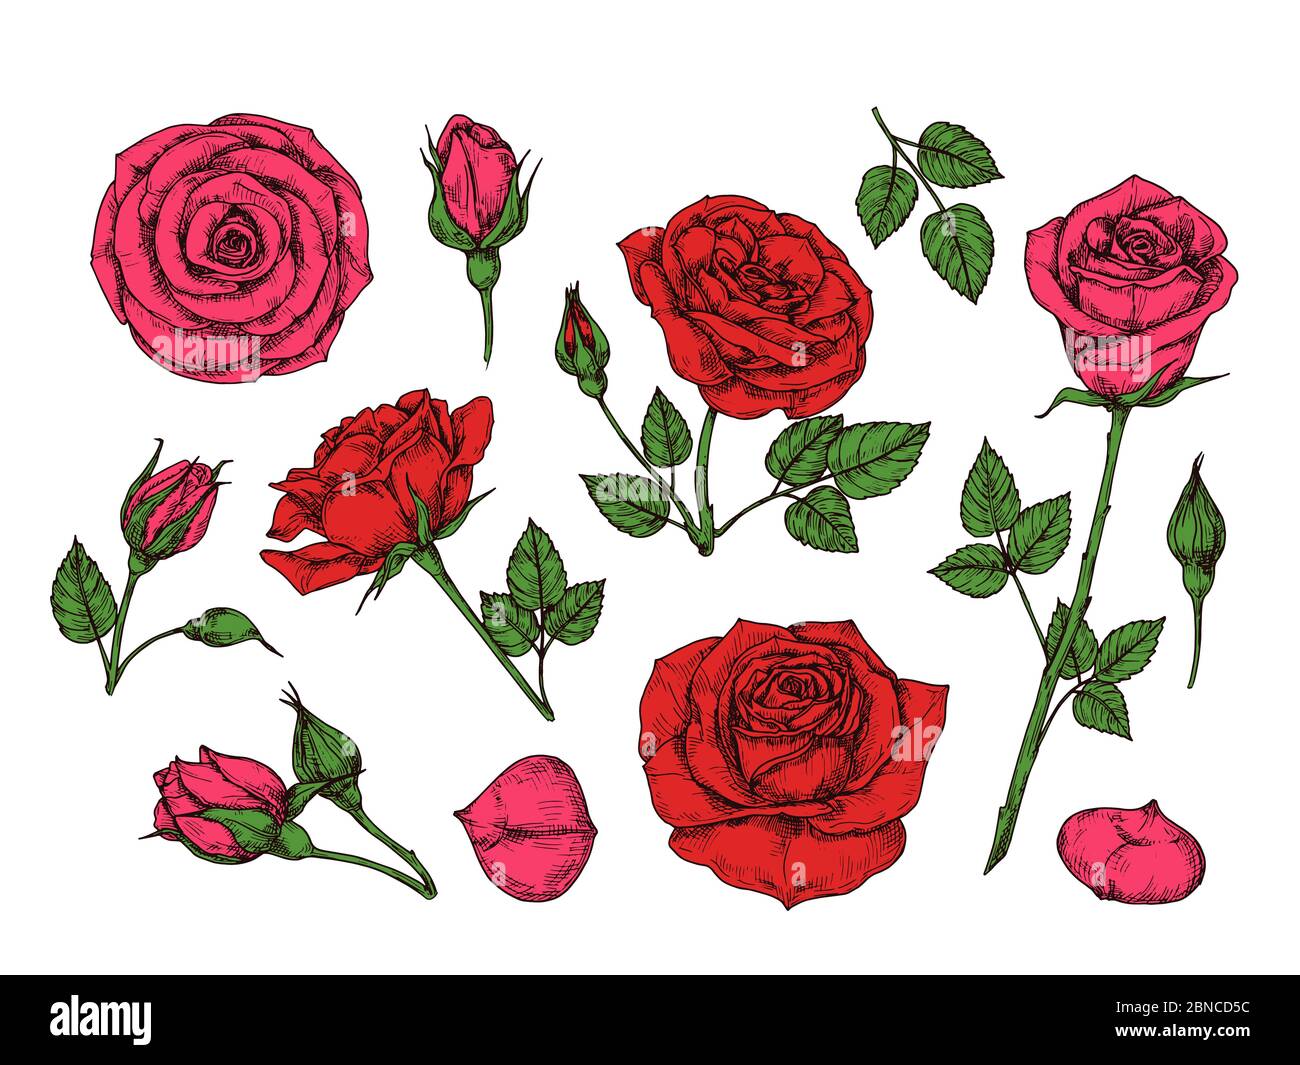 Rose Tattoo Thorn Vector Images over 440